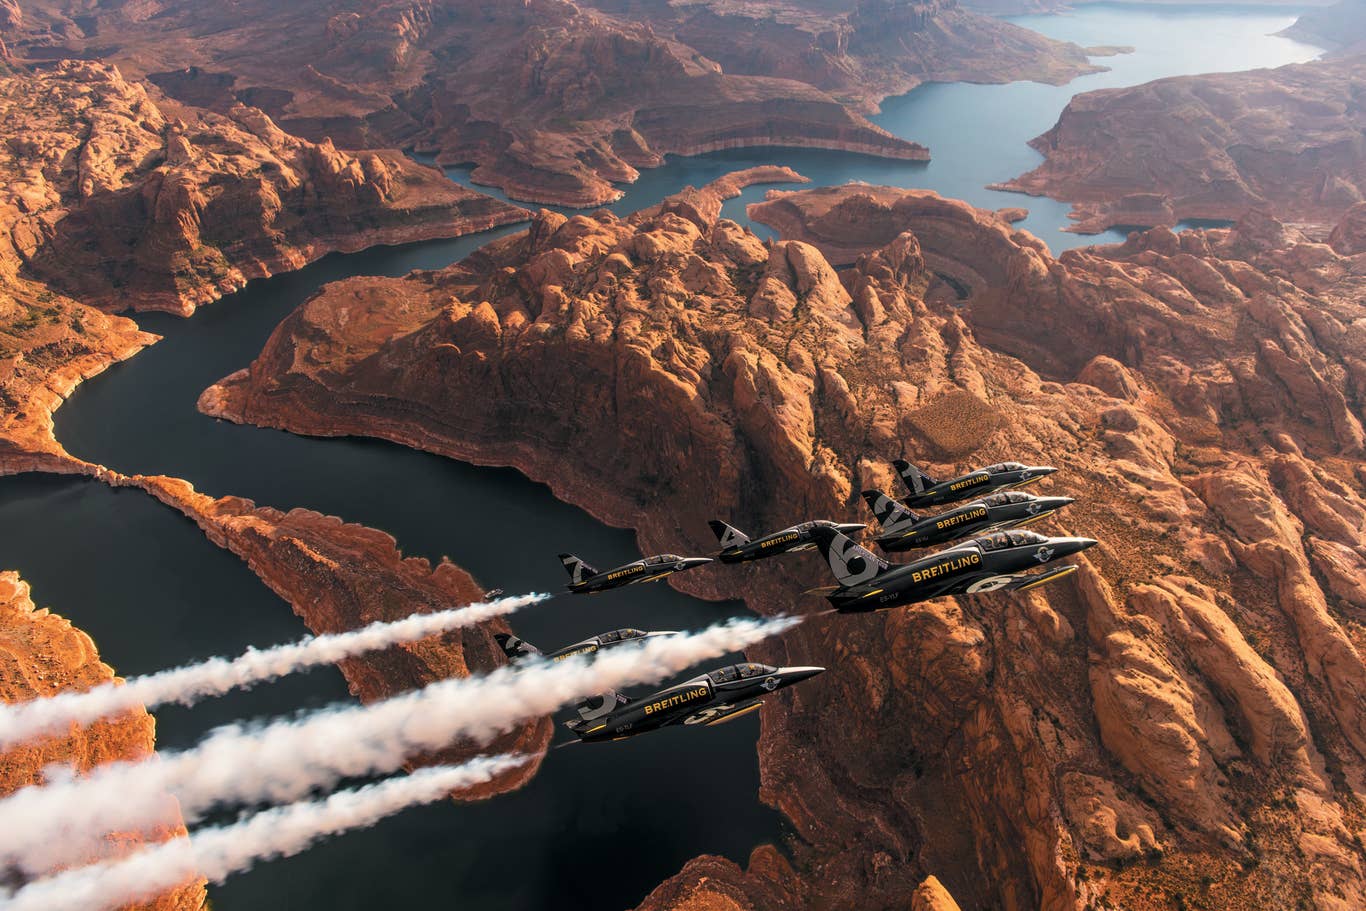 The Glory of the Breitling Jet Team’s American Tour